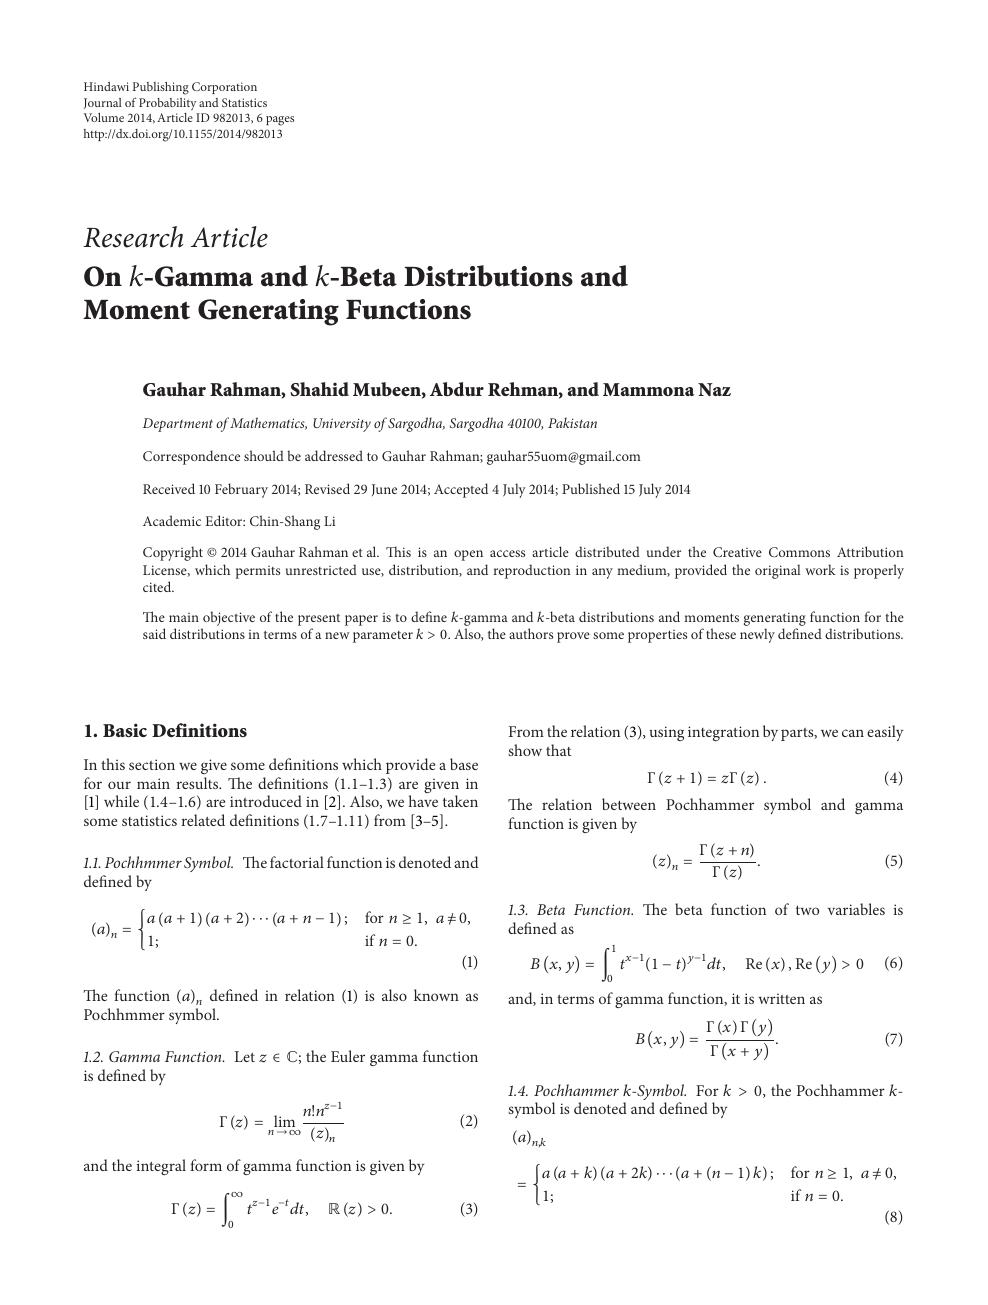 On K Gamma And K Beta Distributions And Moment Generating Functions Topic Of Research Paper In Mathematics Download Scholarly Article Pdf And Read For Free On Cyberleninka Open Science Hub